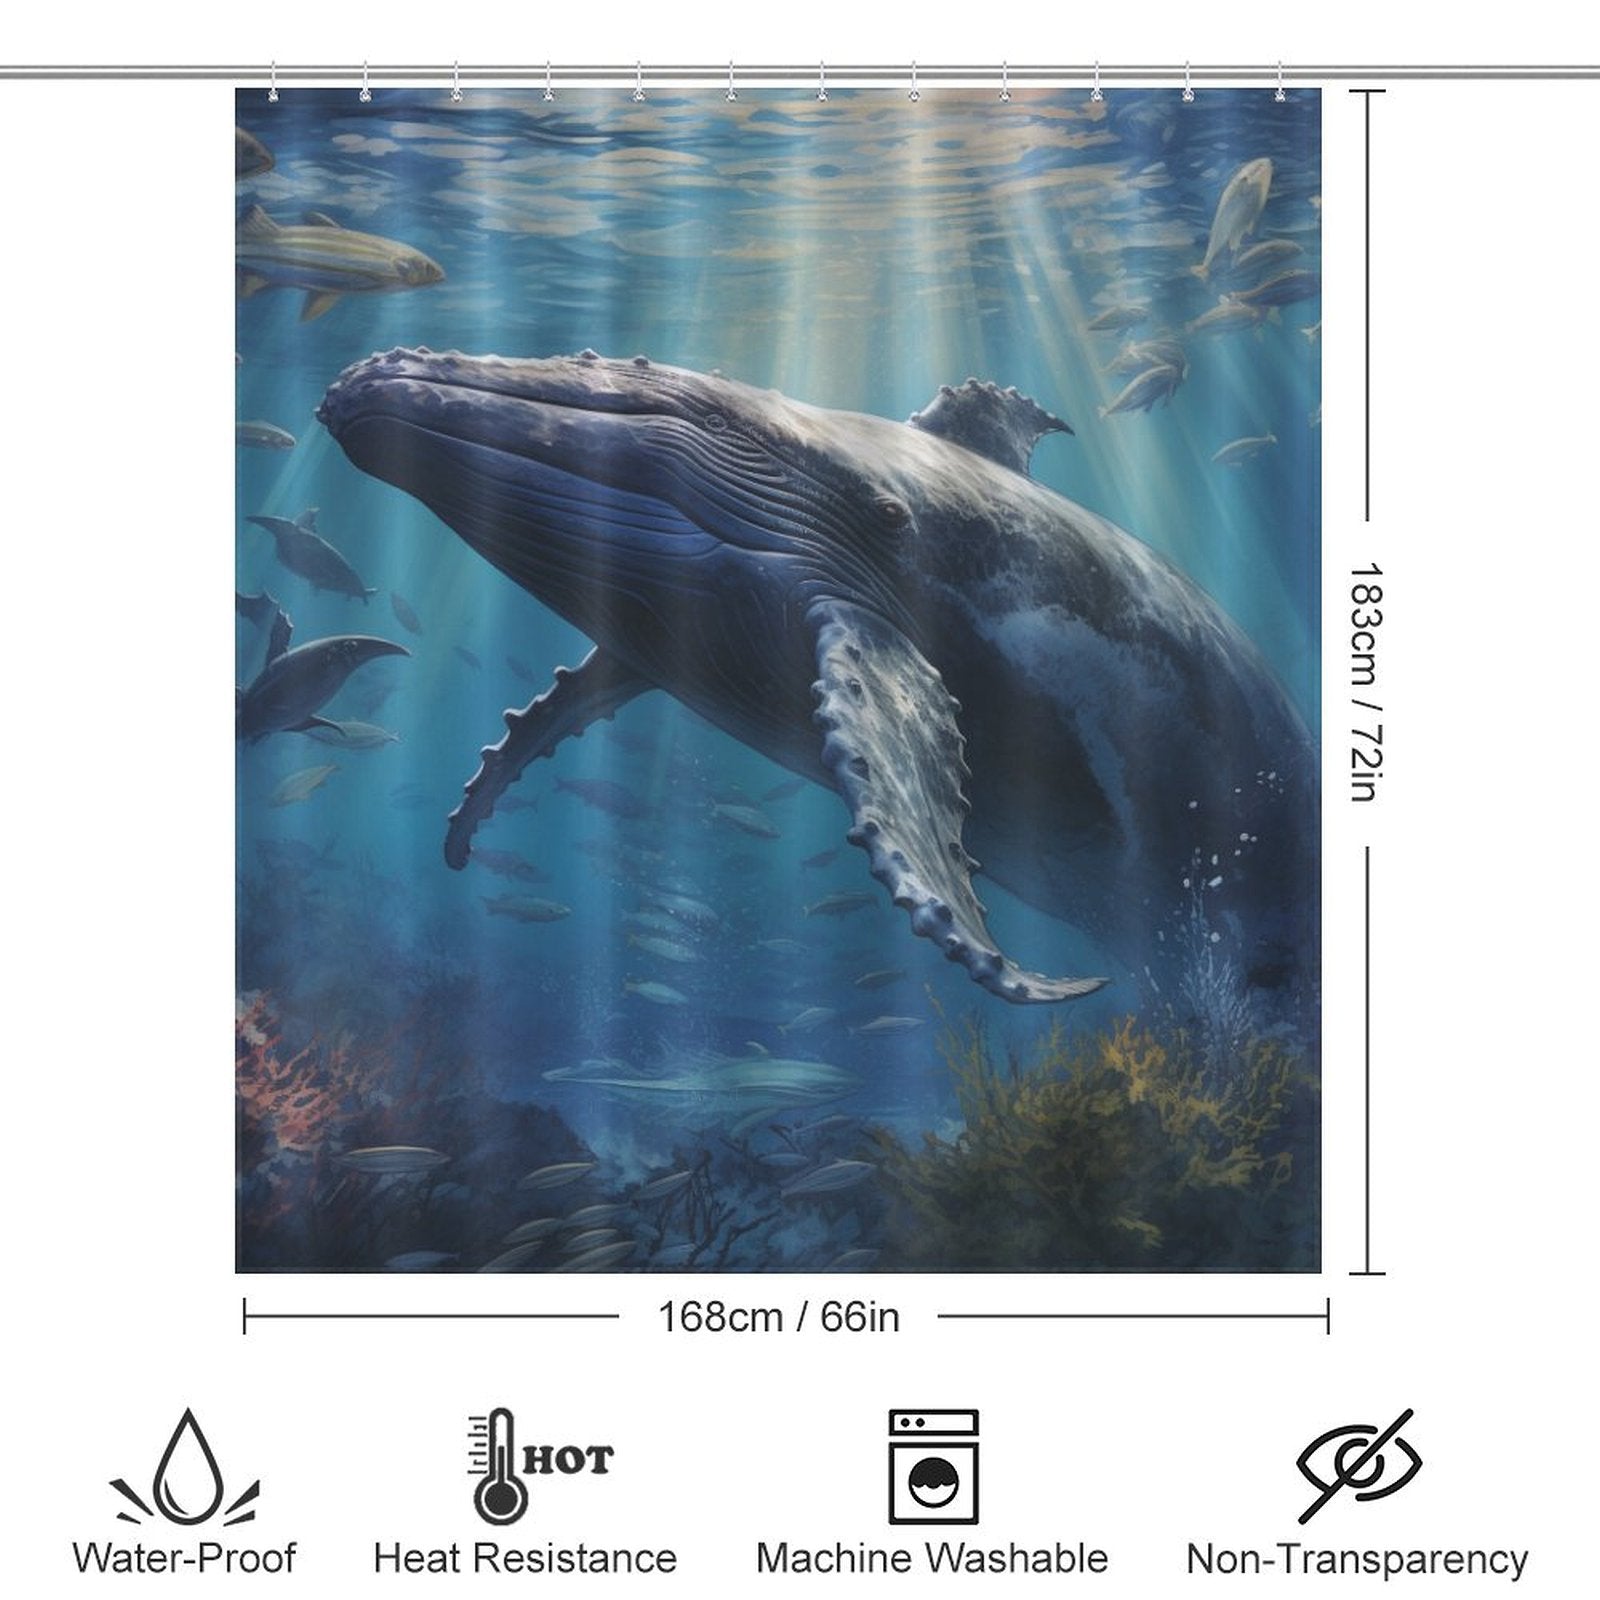 Nautical Serenity Whale Shower Curtain